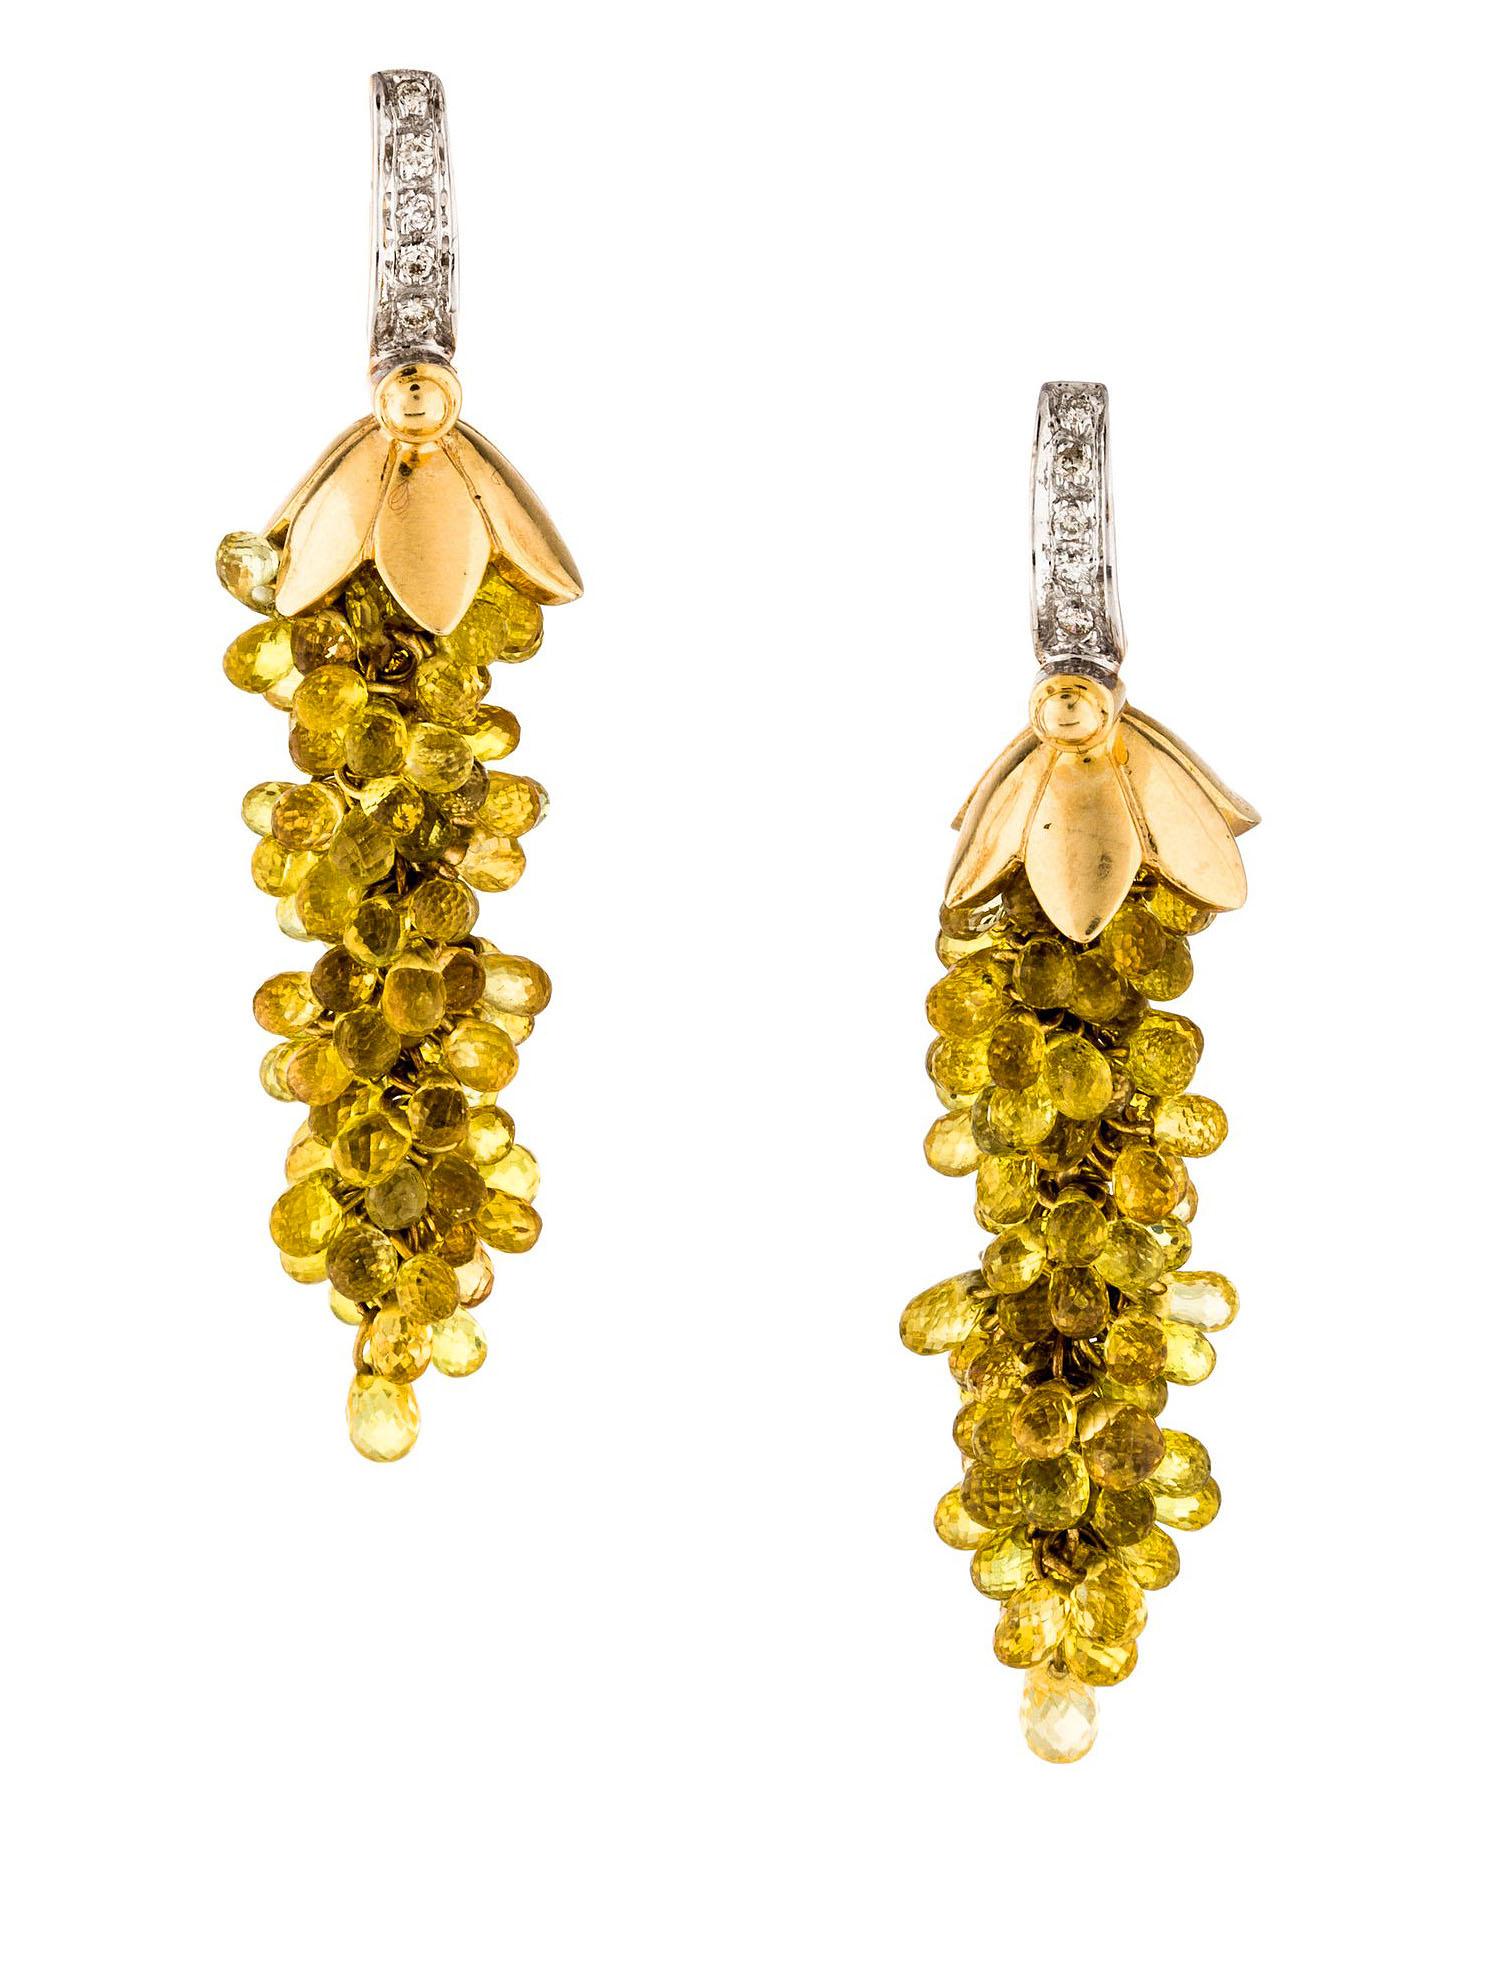 A beautiful pair of chandelier earrings with yellow sapphires held together by a golden flower cap, accented with diamonds on the top in 14K Gold (Yellow and White). Length: 1 3/4